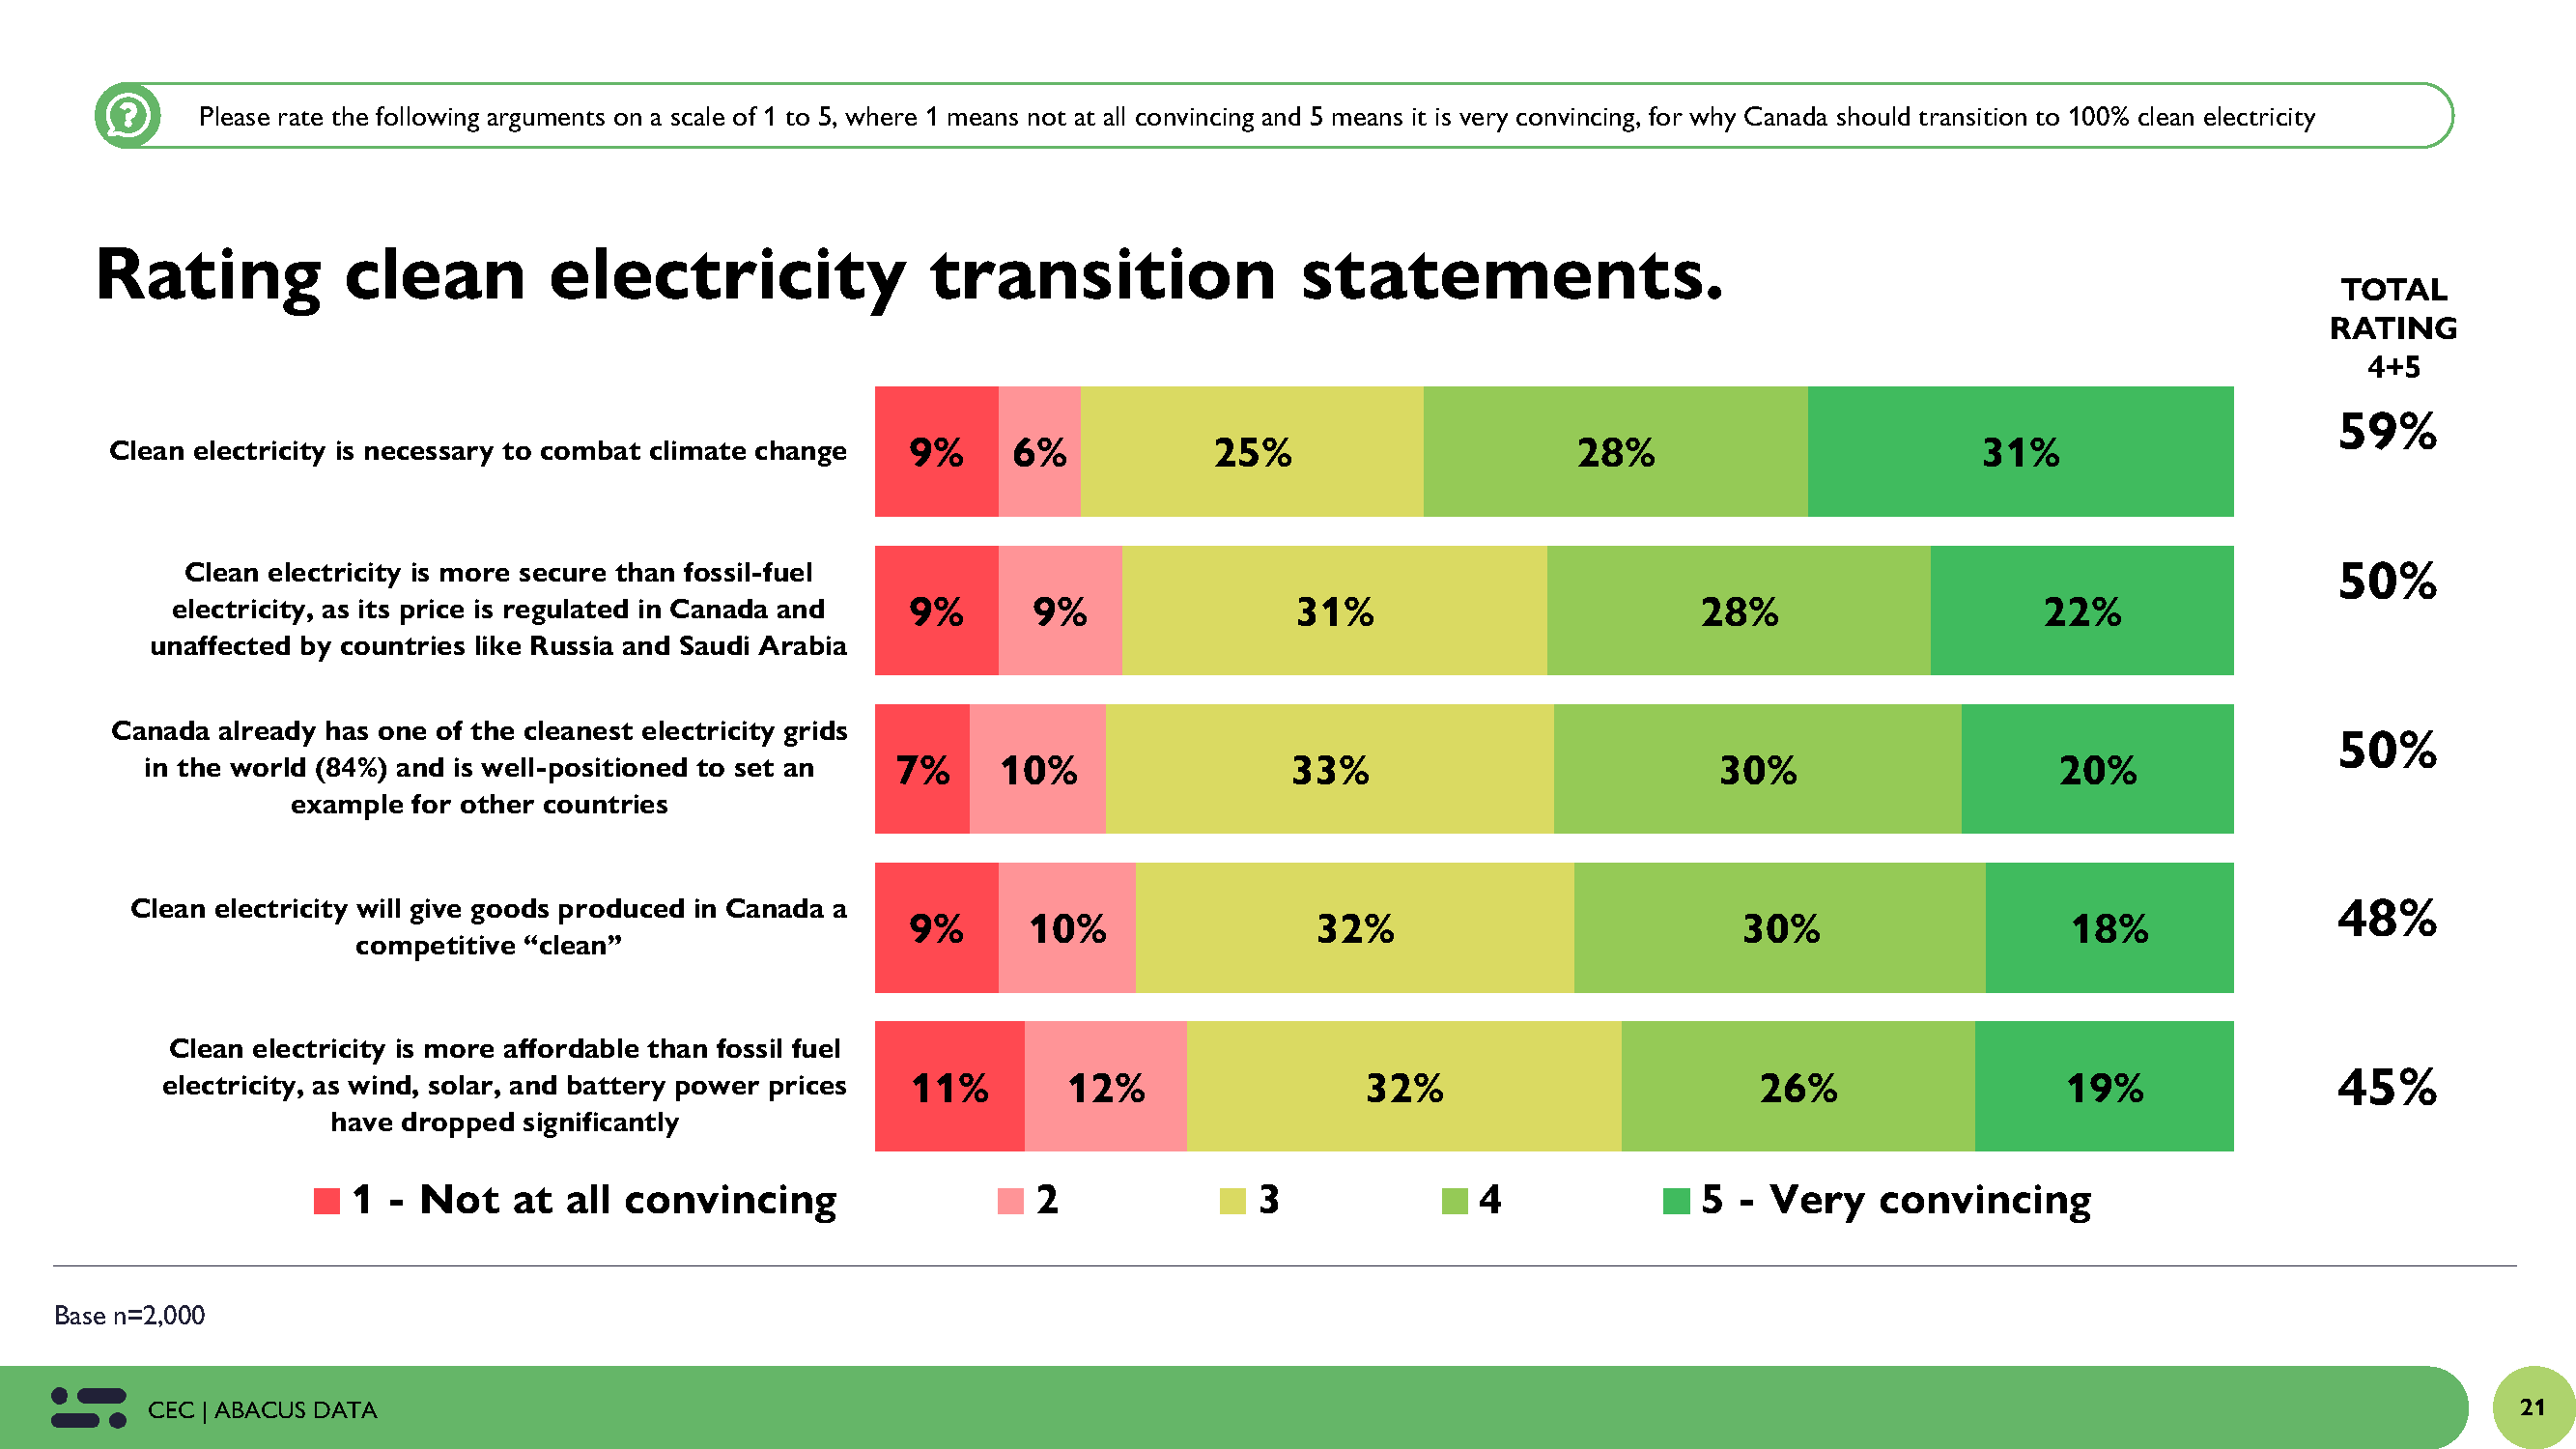 a series of bars indicating percentage of canadians that found each statement: 1 - not convincing at all, 2, 3, 4, or 5 -very convincing. 

The most convincing statement to canadians is that "clean electricity is necessary to combat climate change": 59% found the statement a level 4 or 5 convincing. 